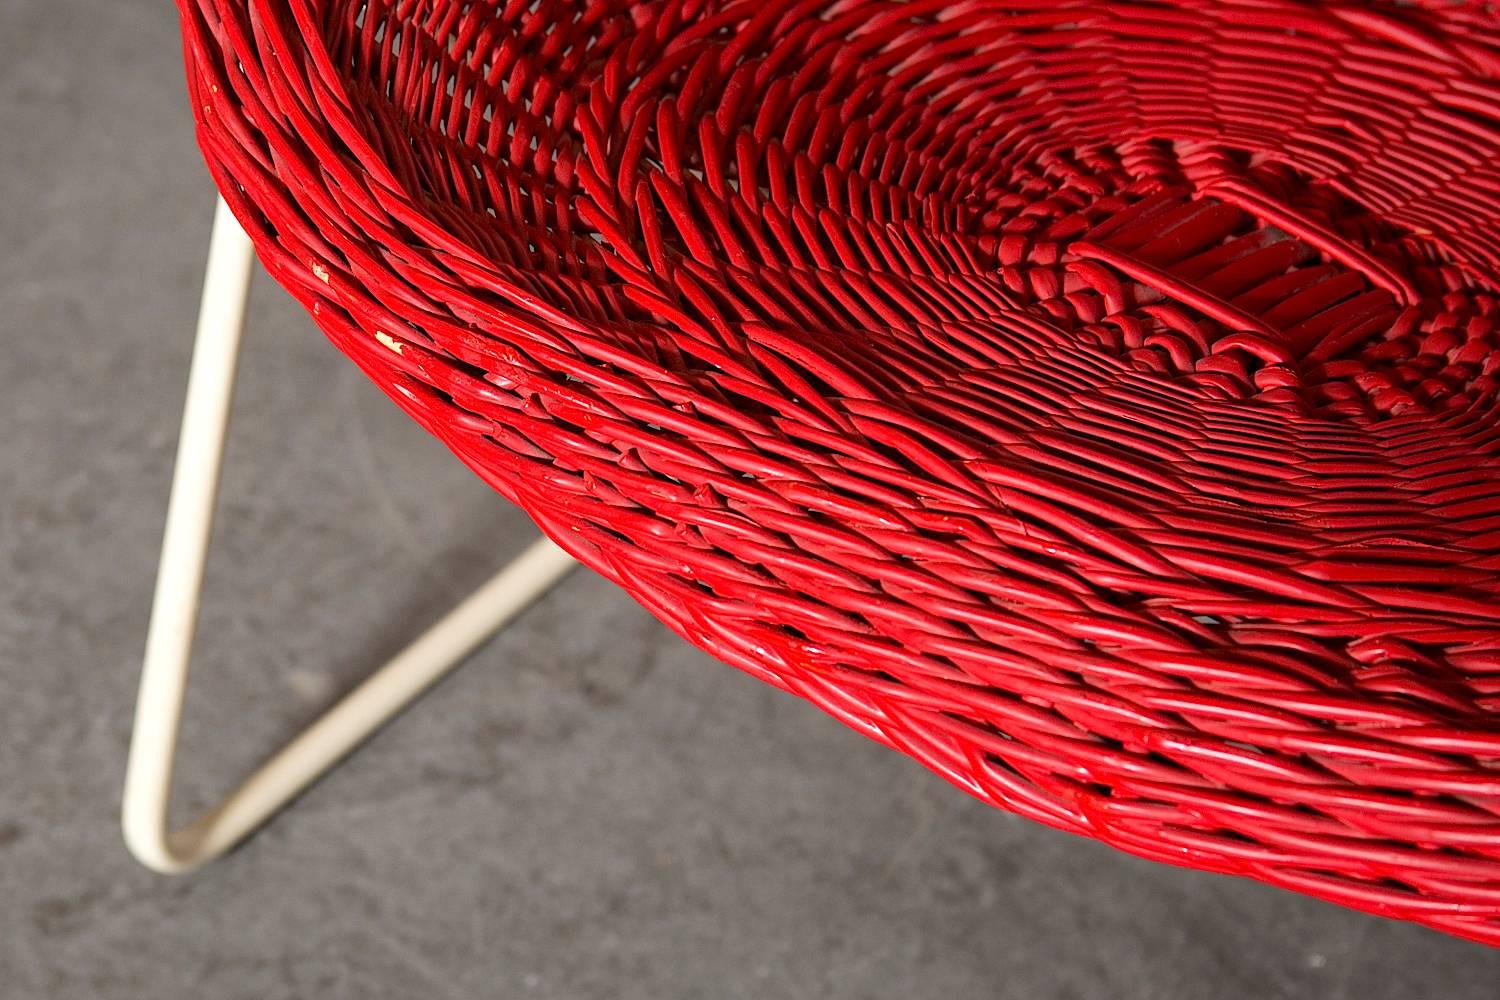 Powder-Coated Mid-Century Jacques Adnet Inspired Red Woven Rattan and Wire Hoop Chair For Sale